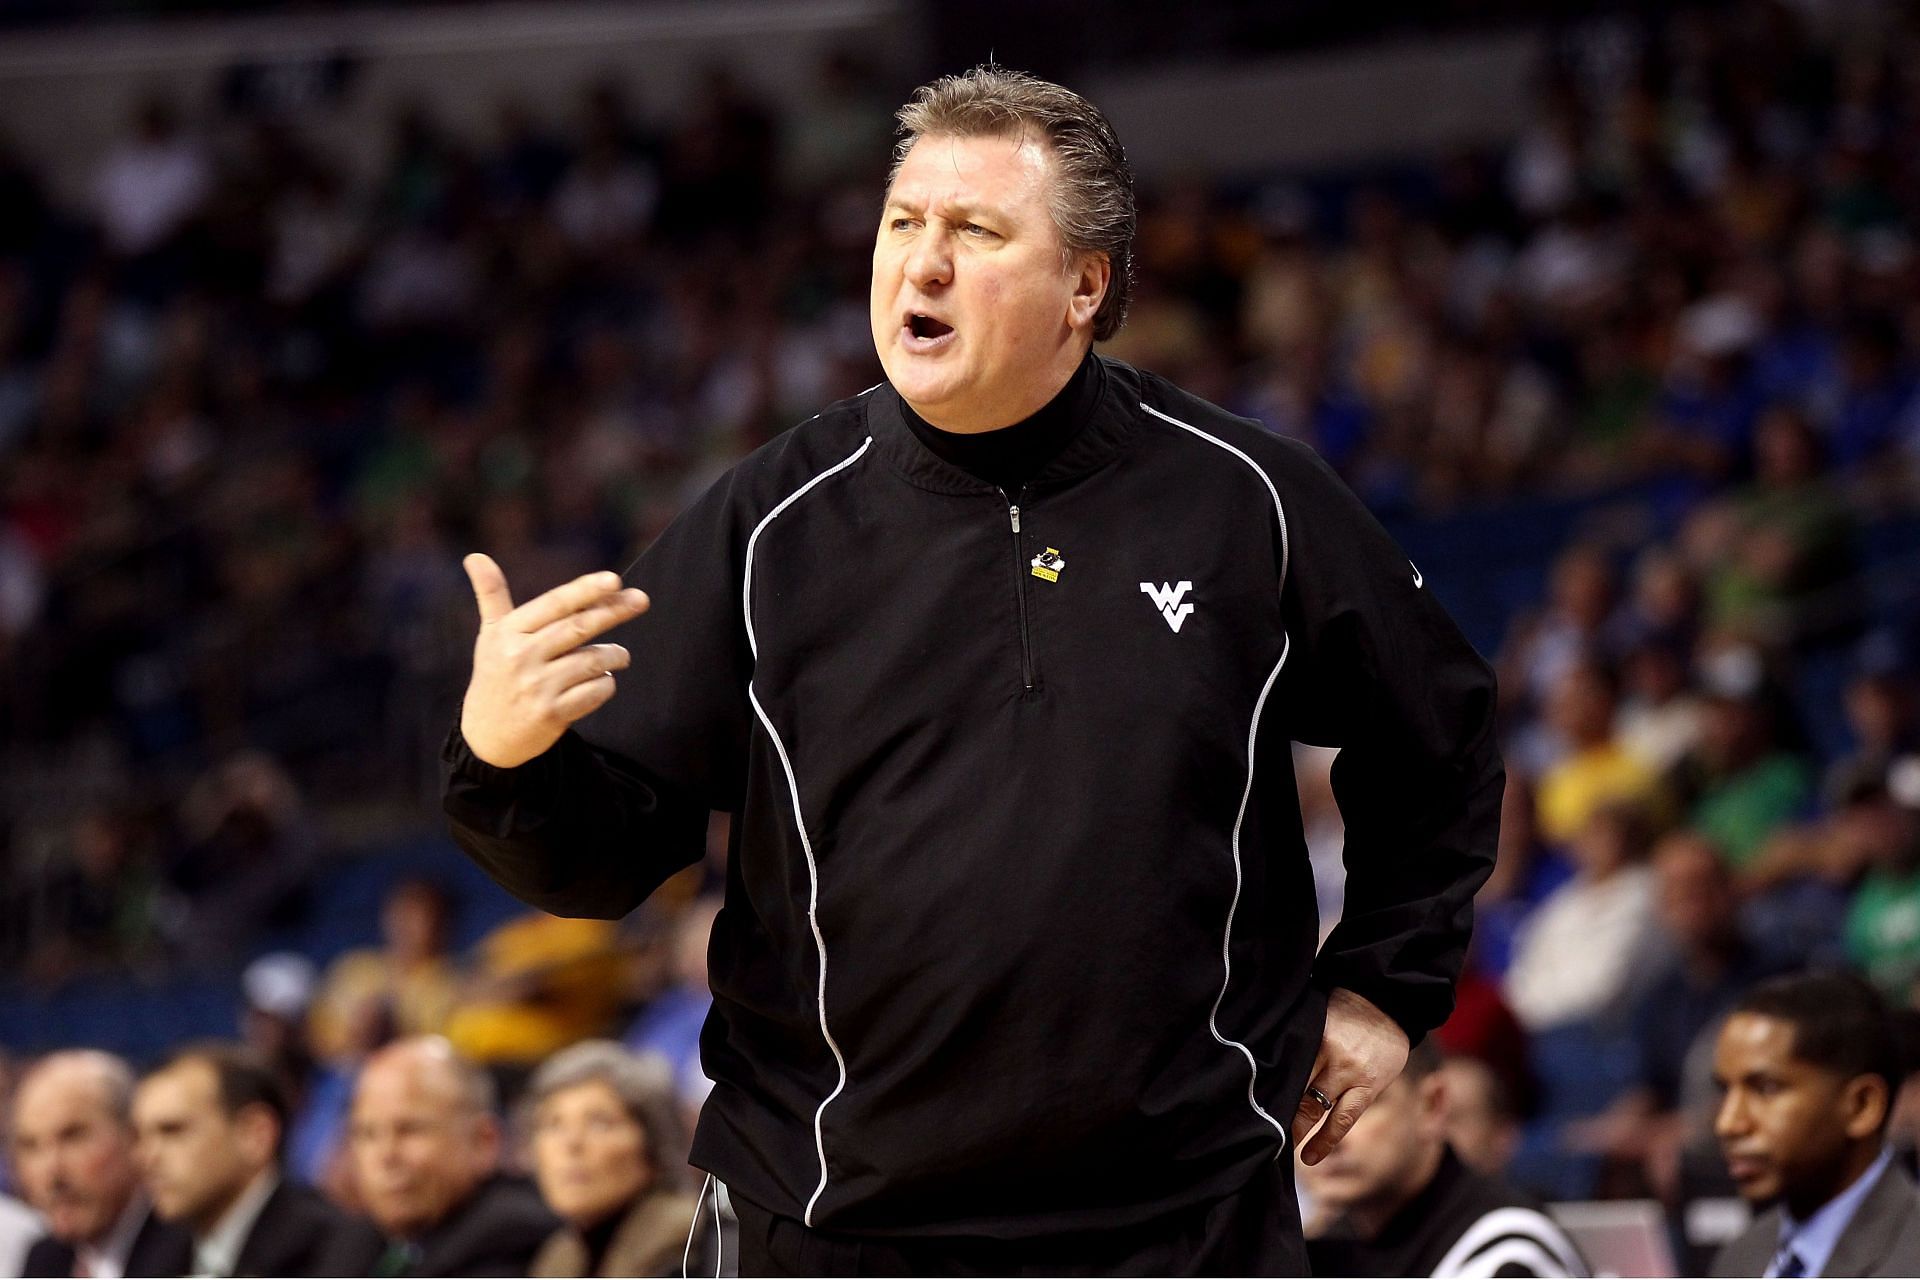 Huggins won the Big East tournament and advanced to the Final Four in 2010 (Image via Getty Images)